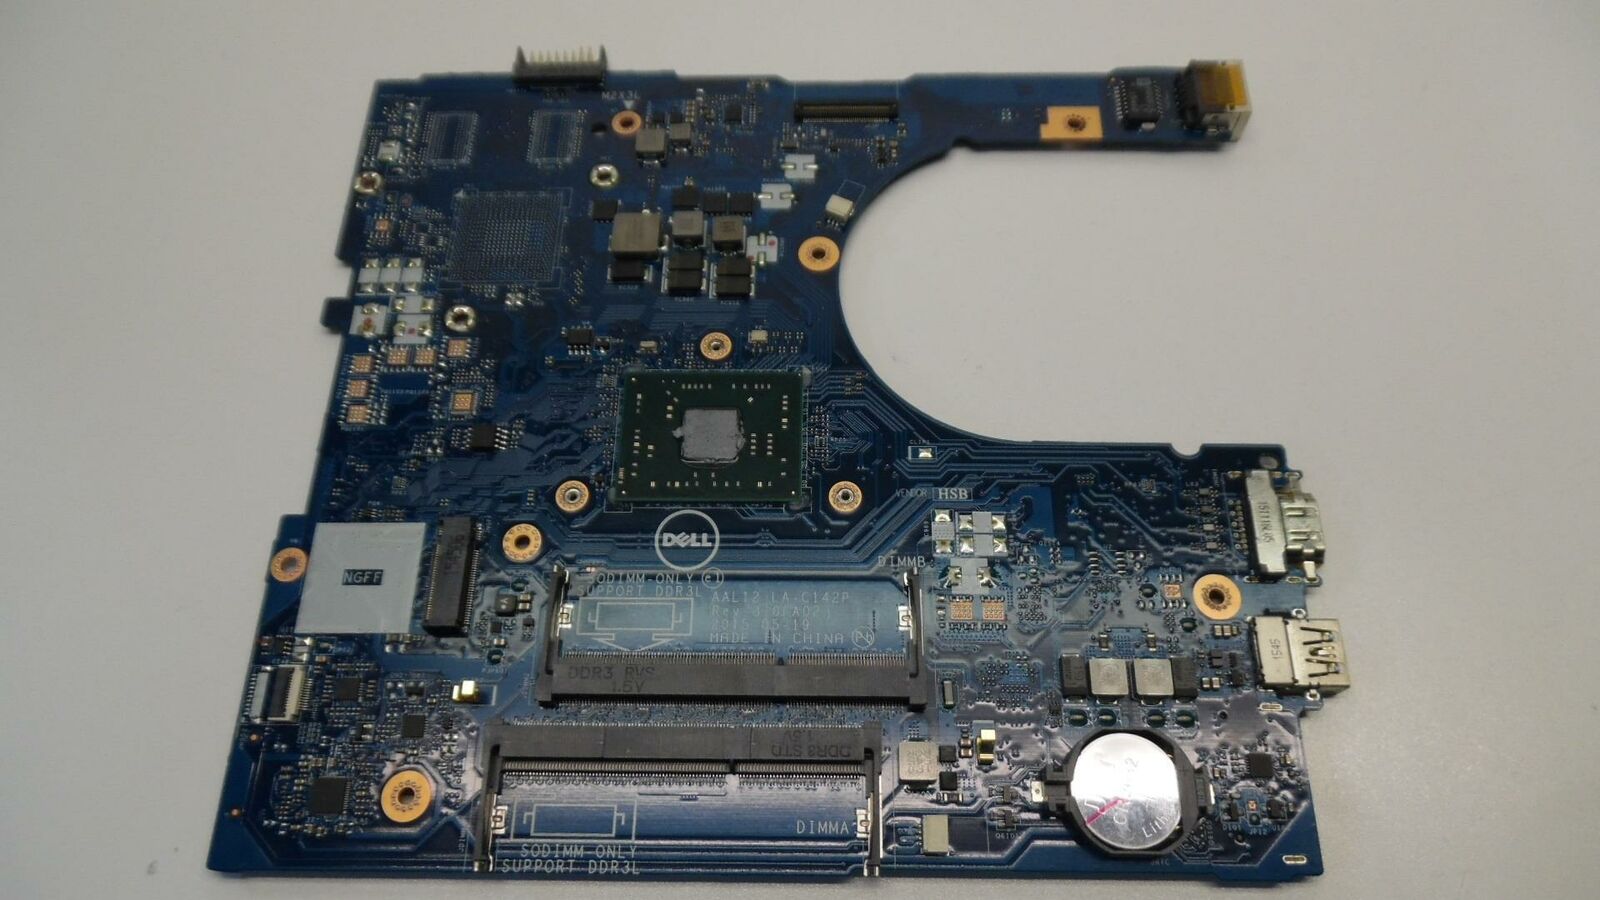 Dell Inspiron 5755 AMD A8-7410 2.2GHz Motherboard LA-C142P 01N0C6 - Parts Only